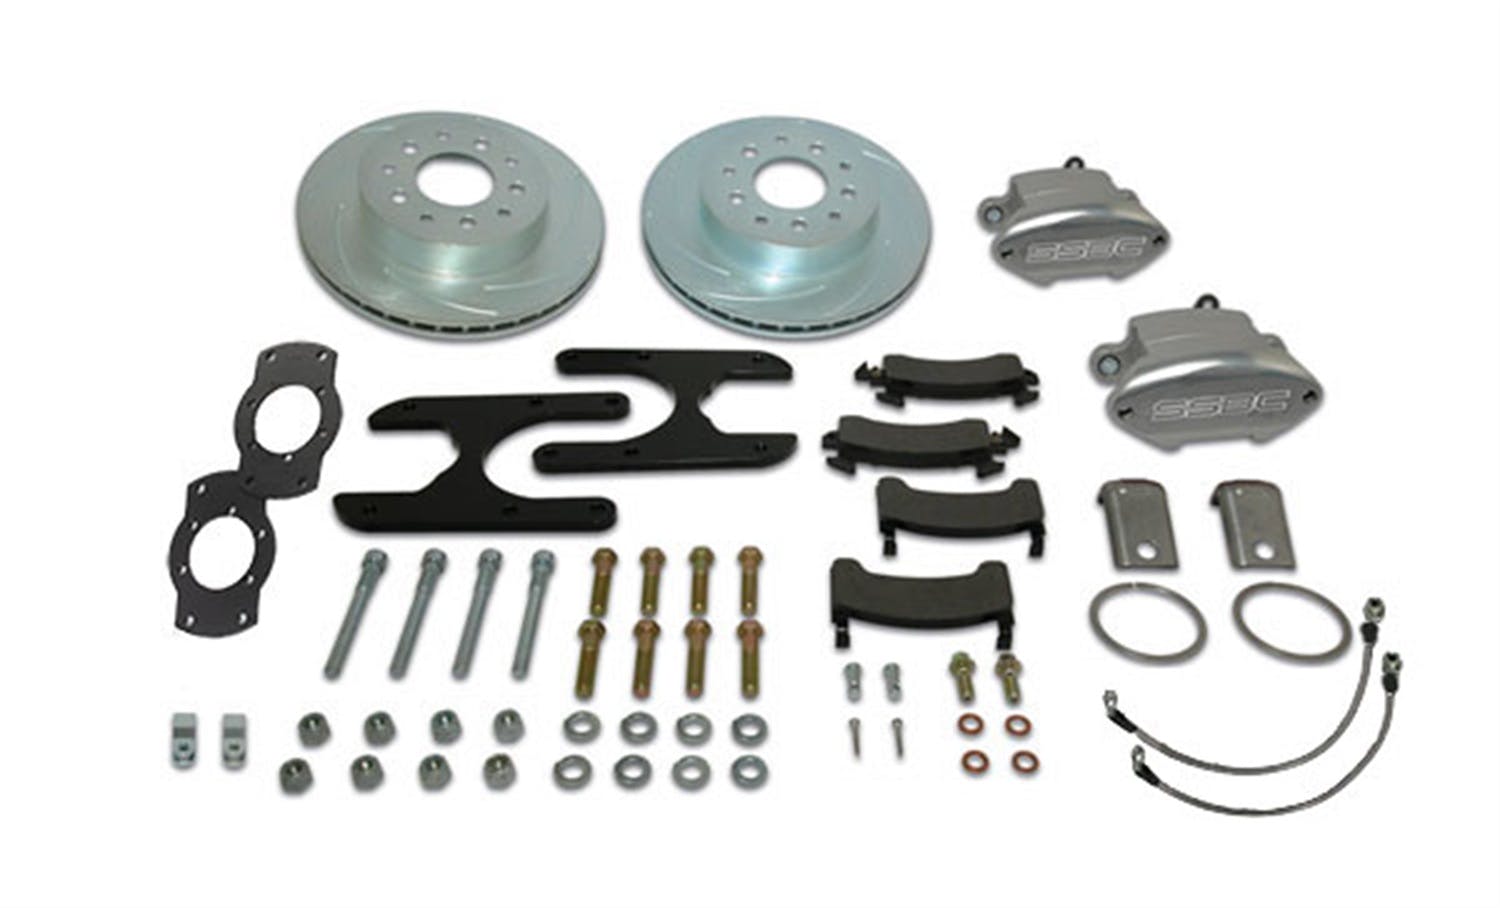 Stainless Steel Brakes A155-3R Sport R1 A155-3 kit w/red calipers